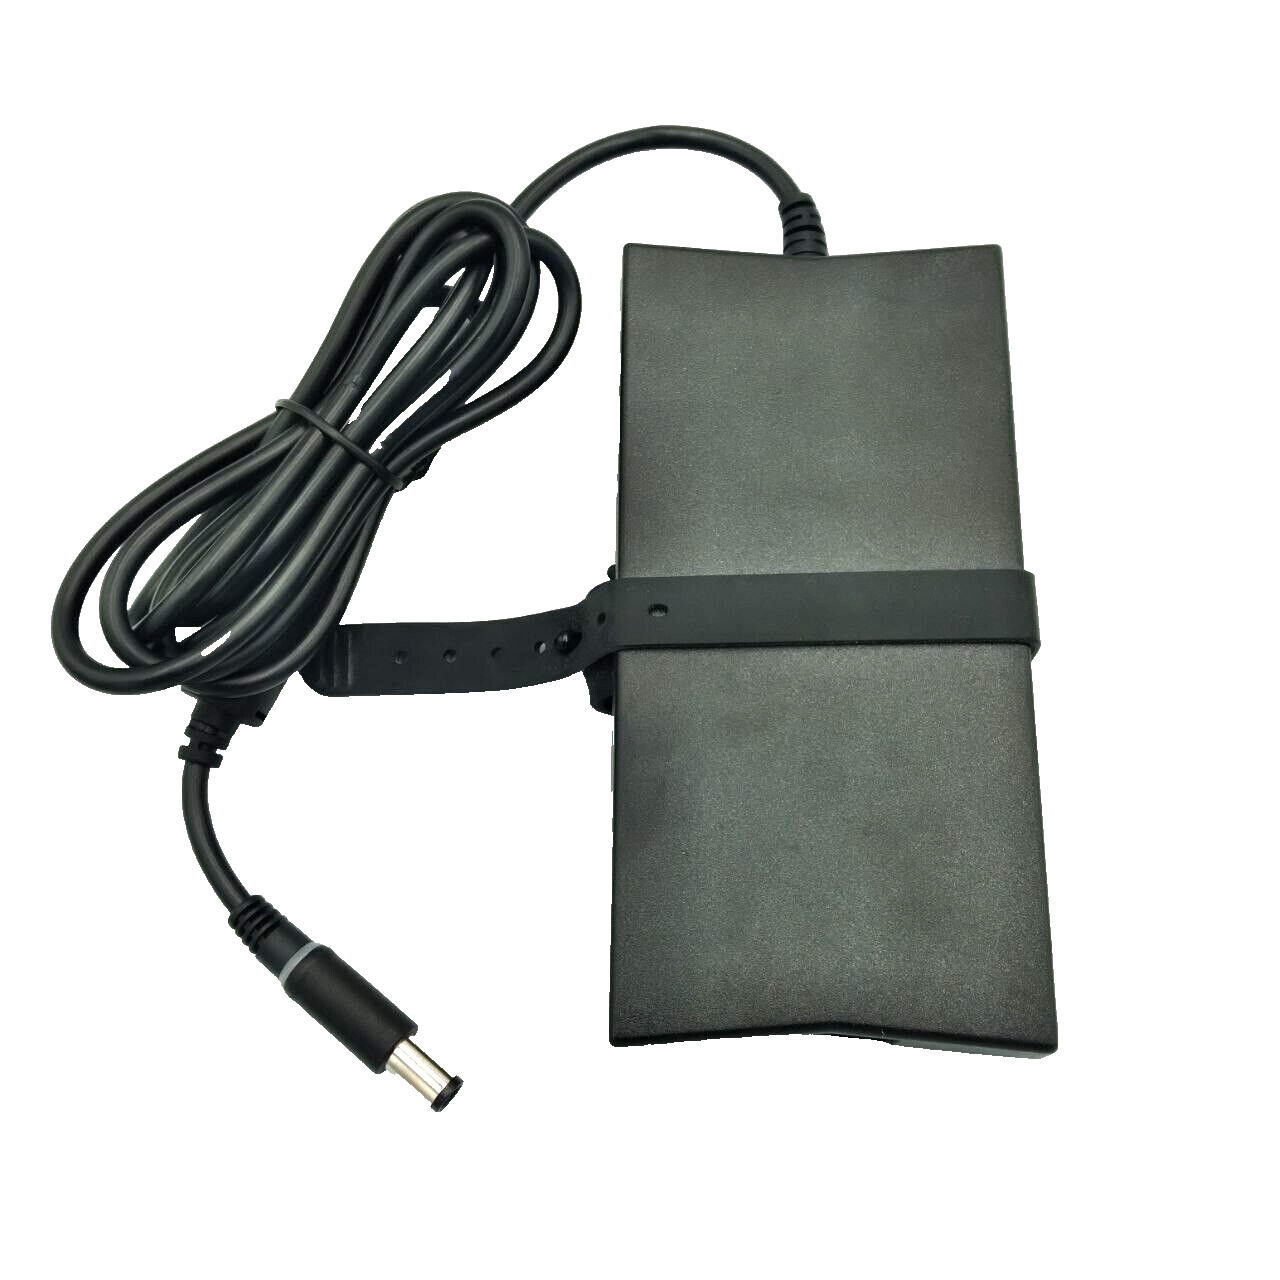 Dell 130W AC Adapter With 7.4 mm DC Jack 130 W AC Adapter 6 Foot Cable